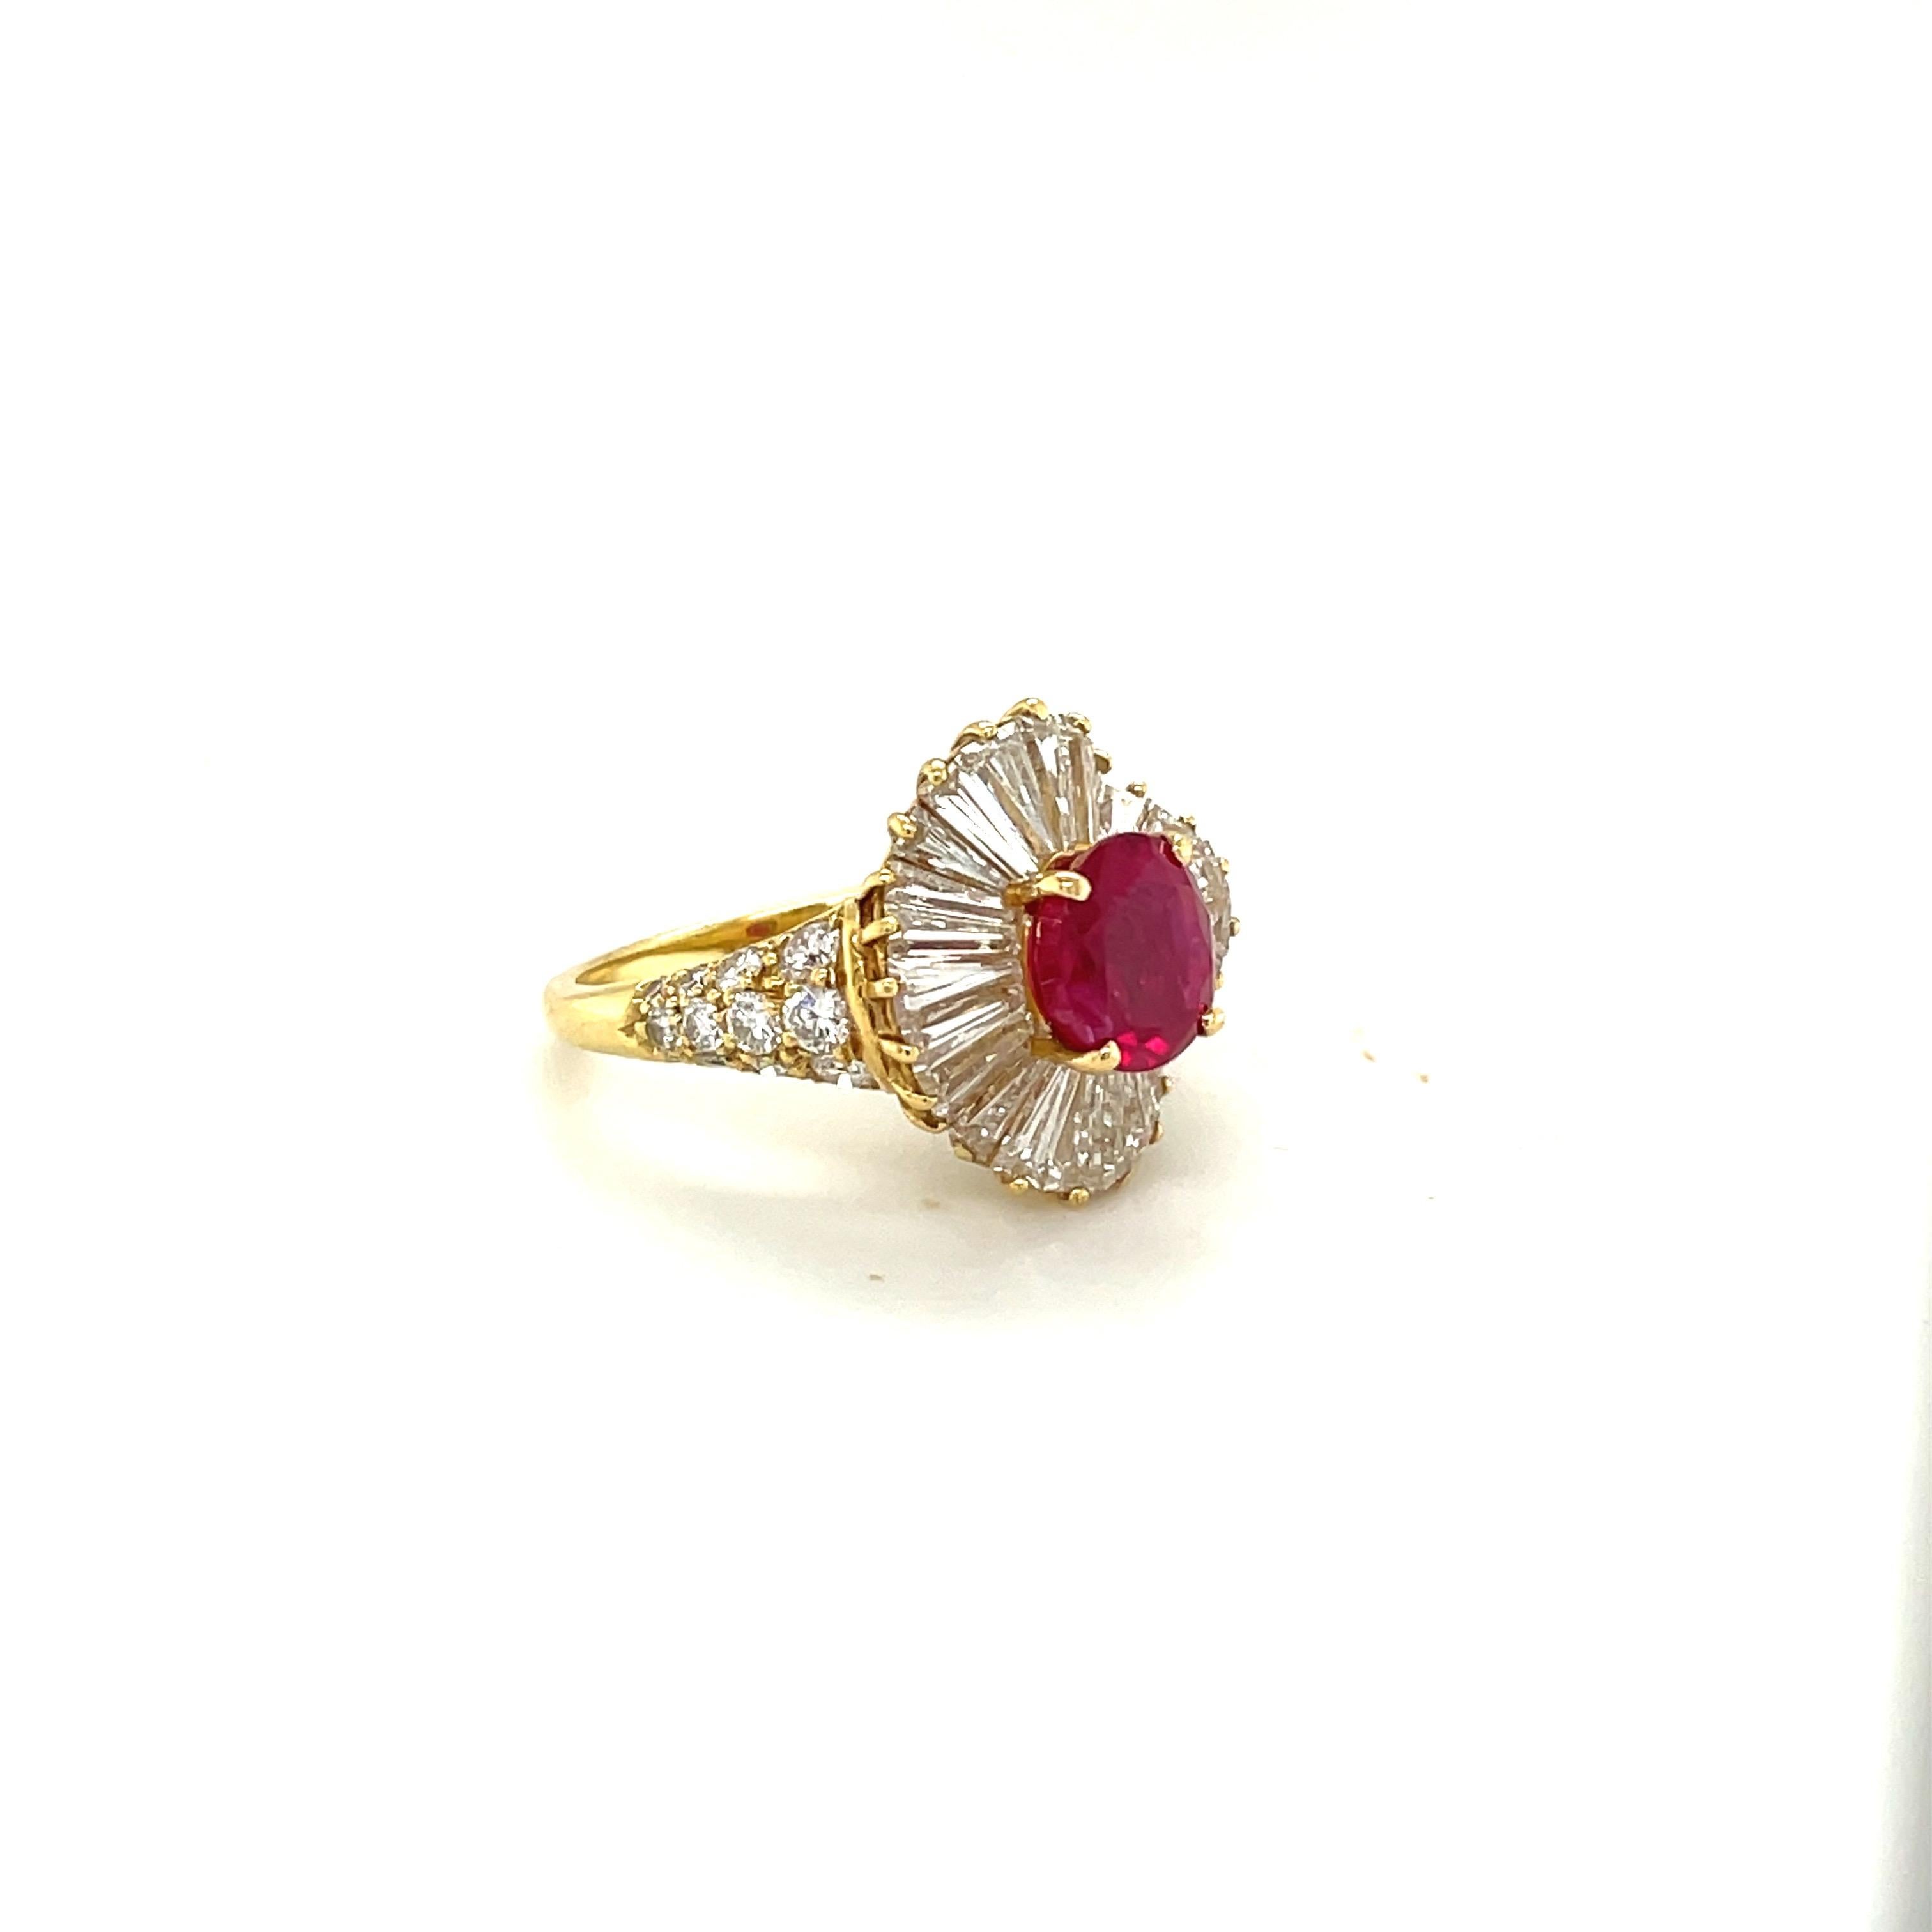 A classically designed 18 karat yellow gold ring set with a vibrant 2.89 carat oval Burmese ruby. The ruby sits in a ballerina setting of tapered baguette diamonds. Round brilliant diamonds are set half way down the shank.
Ruby weight 2.52